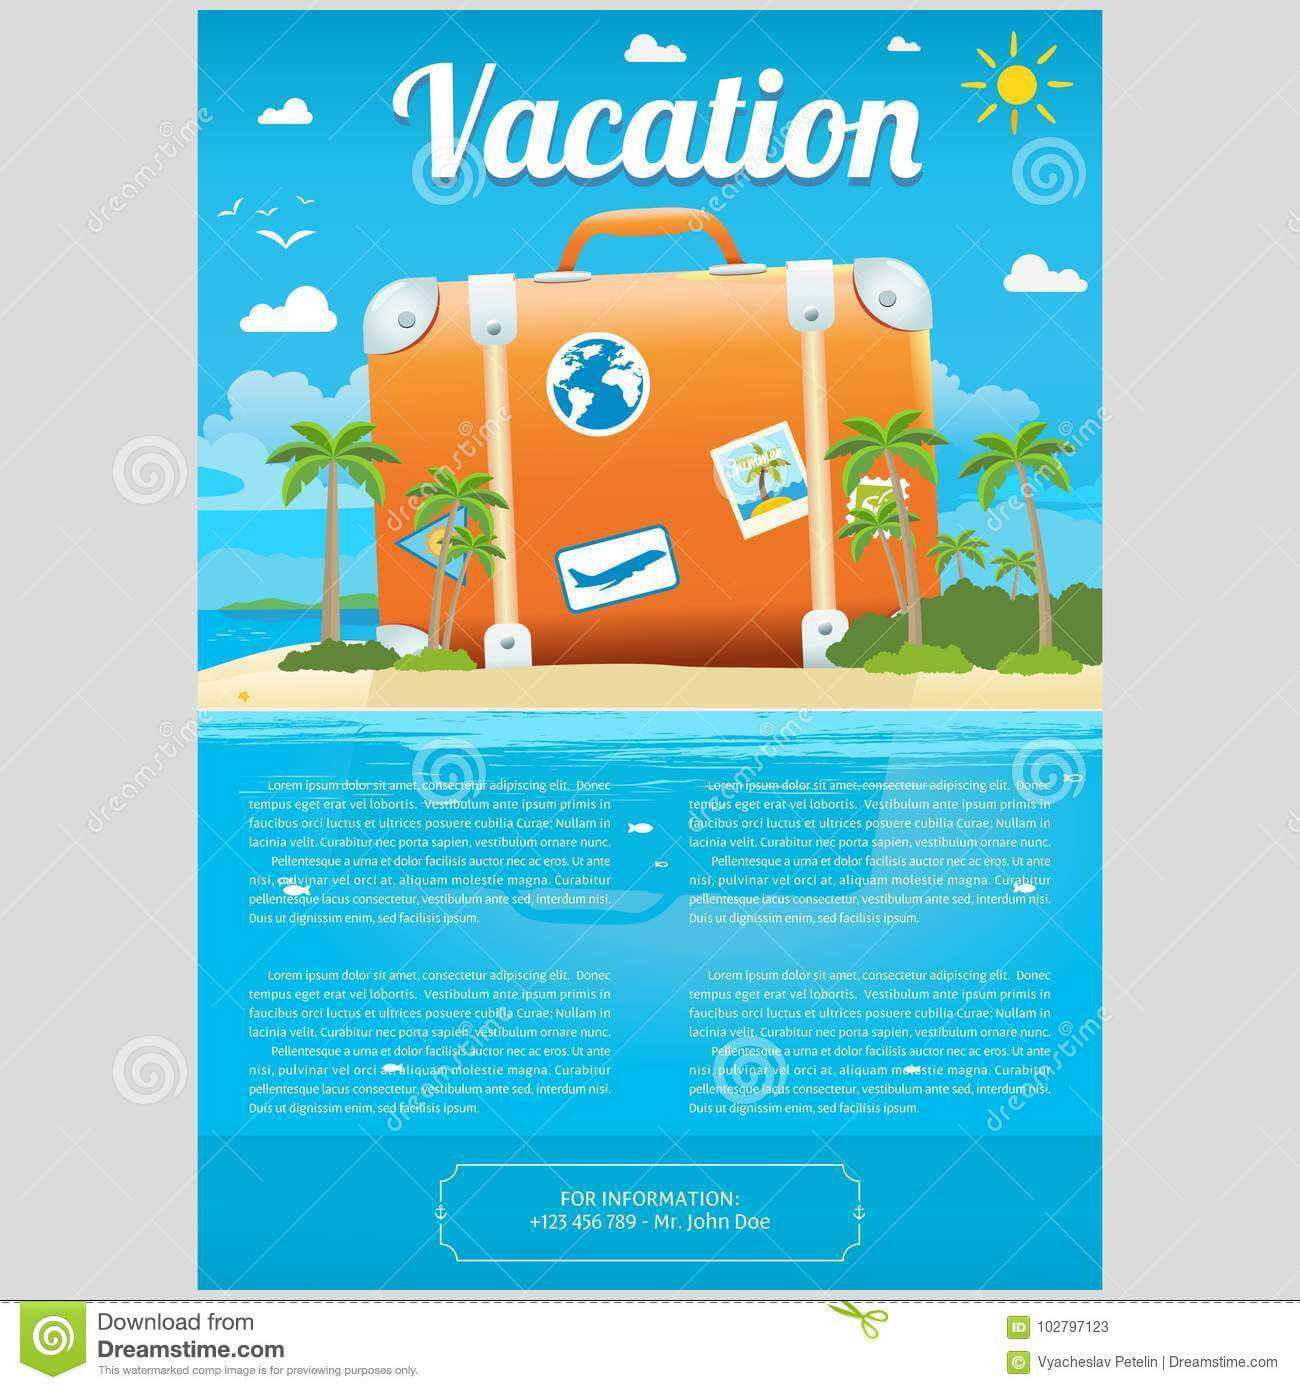 Vector Illustration Of Travel Suitcase On The Sea Island Intended For Island Brochure Template